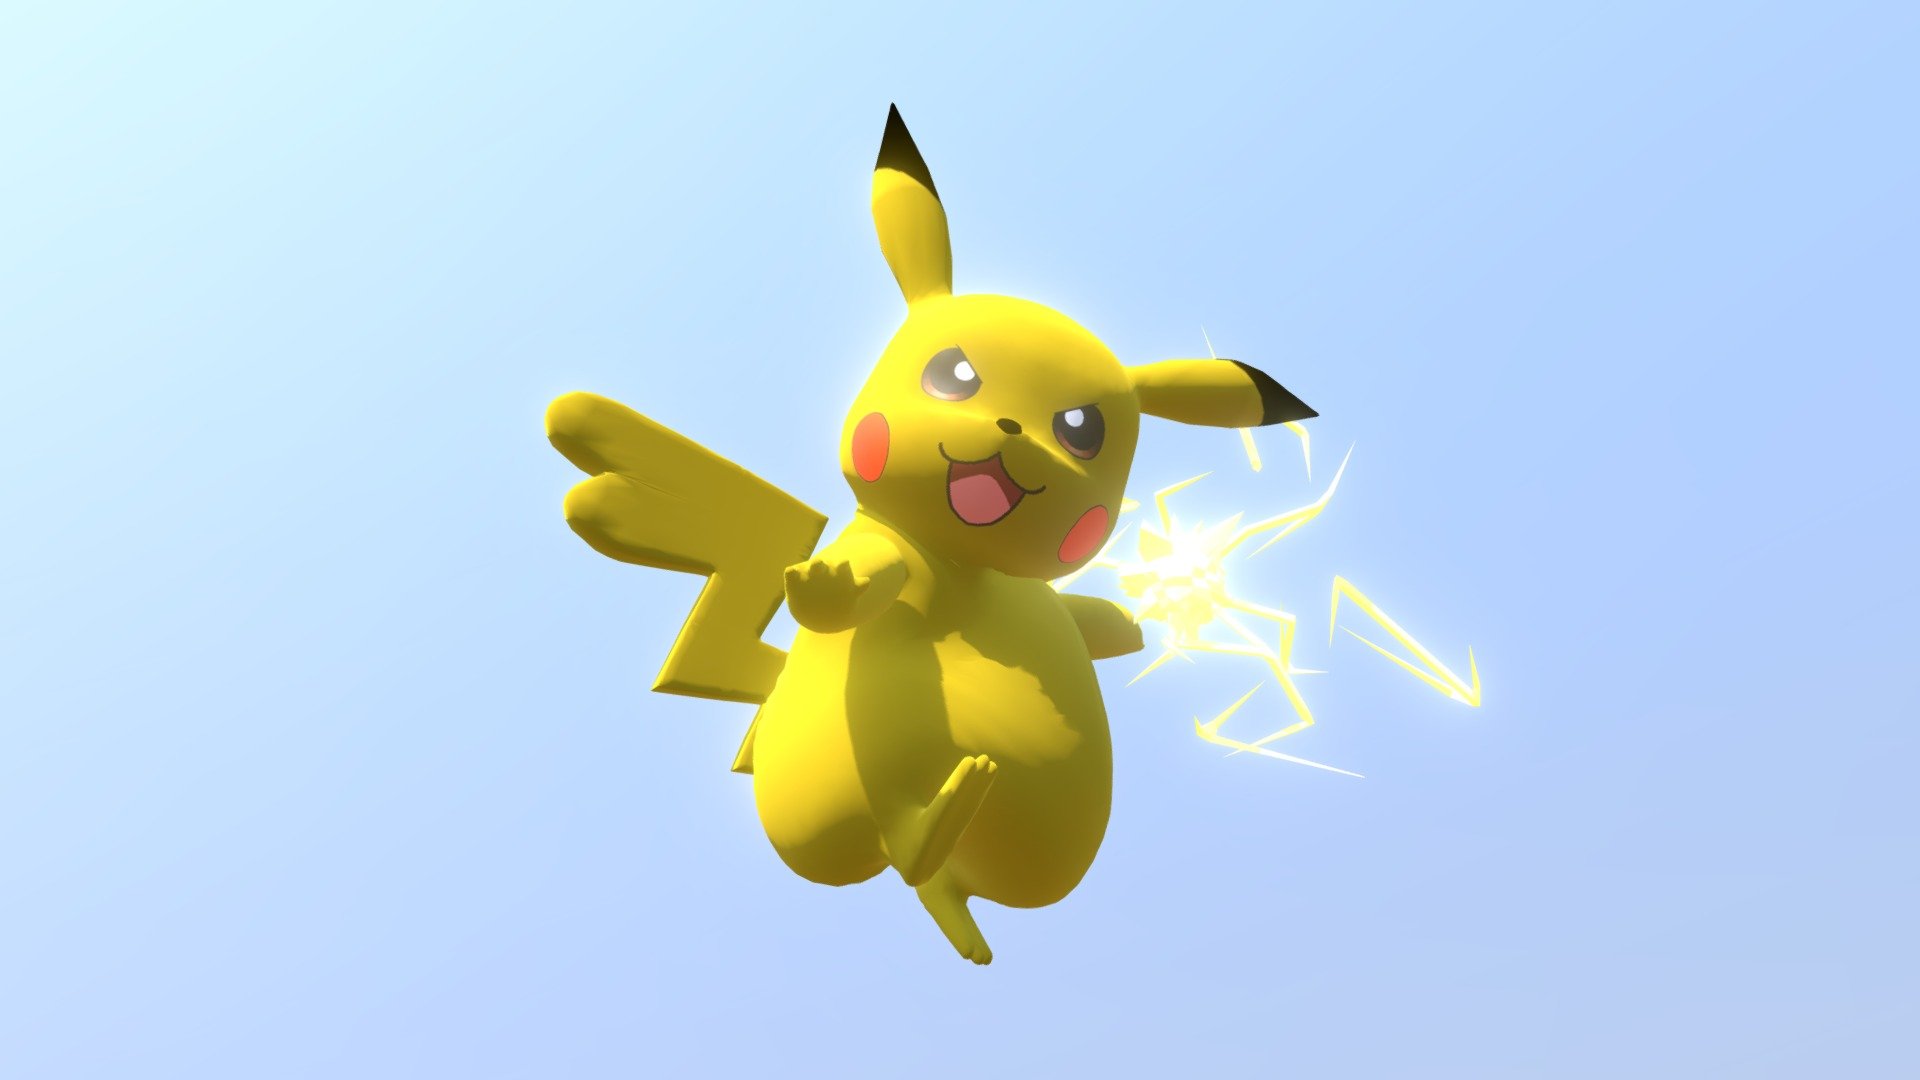 Another 3D model of a Pokemon for my older brother, and this will be the last one I do for the rest of the year because I want to do other projects that are more in line with my interests. However, I'll continue to dedicate to him every year at least one 3D model of something from his favorite franchise.

As with Piplup, Pikachu's textures were made from scratch in GIMP, but this time the character is a full 3D figure, unsegmented, so this is one of my first more or less advanced Rigging works along the way that I had done previously.

This project was also a revelation for me, as it made me think that the style of my next 3D models would have a more cartoon or anime style, even though that is not reflected here.

Here are the links for my posts of the renders I made of Pikachu on my Twitter, DeviantArt and Ko-fi accounts:

https://twitter.com/DanielBeltranS2/status/1515466096114954243
https://www.deviantart.com/danielbeltrans2/art/Pikachu-in-3D-913262492
https://ko-fi.com/i/IQ5Q6C6T4Q - Pikachu (in 3D) - Download Free 3D model by DanielBeltranSantiago 3d model